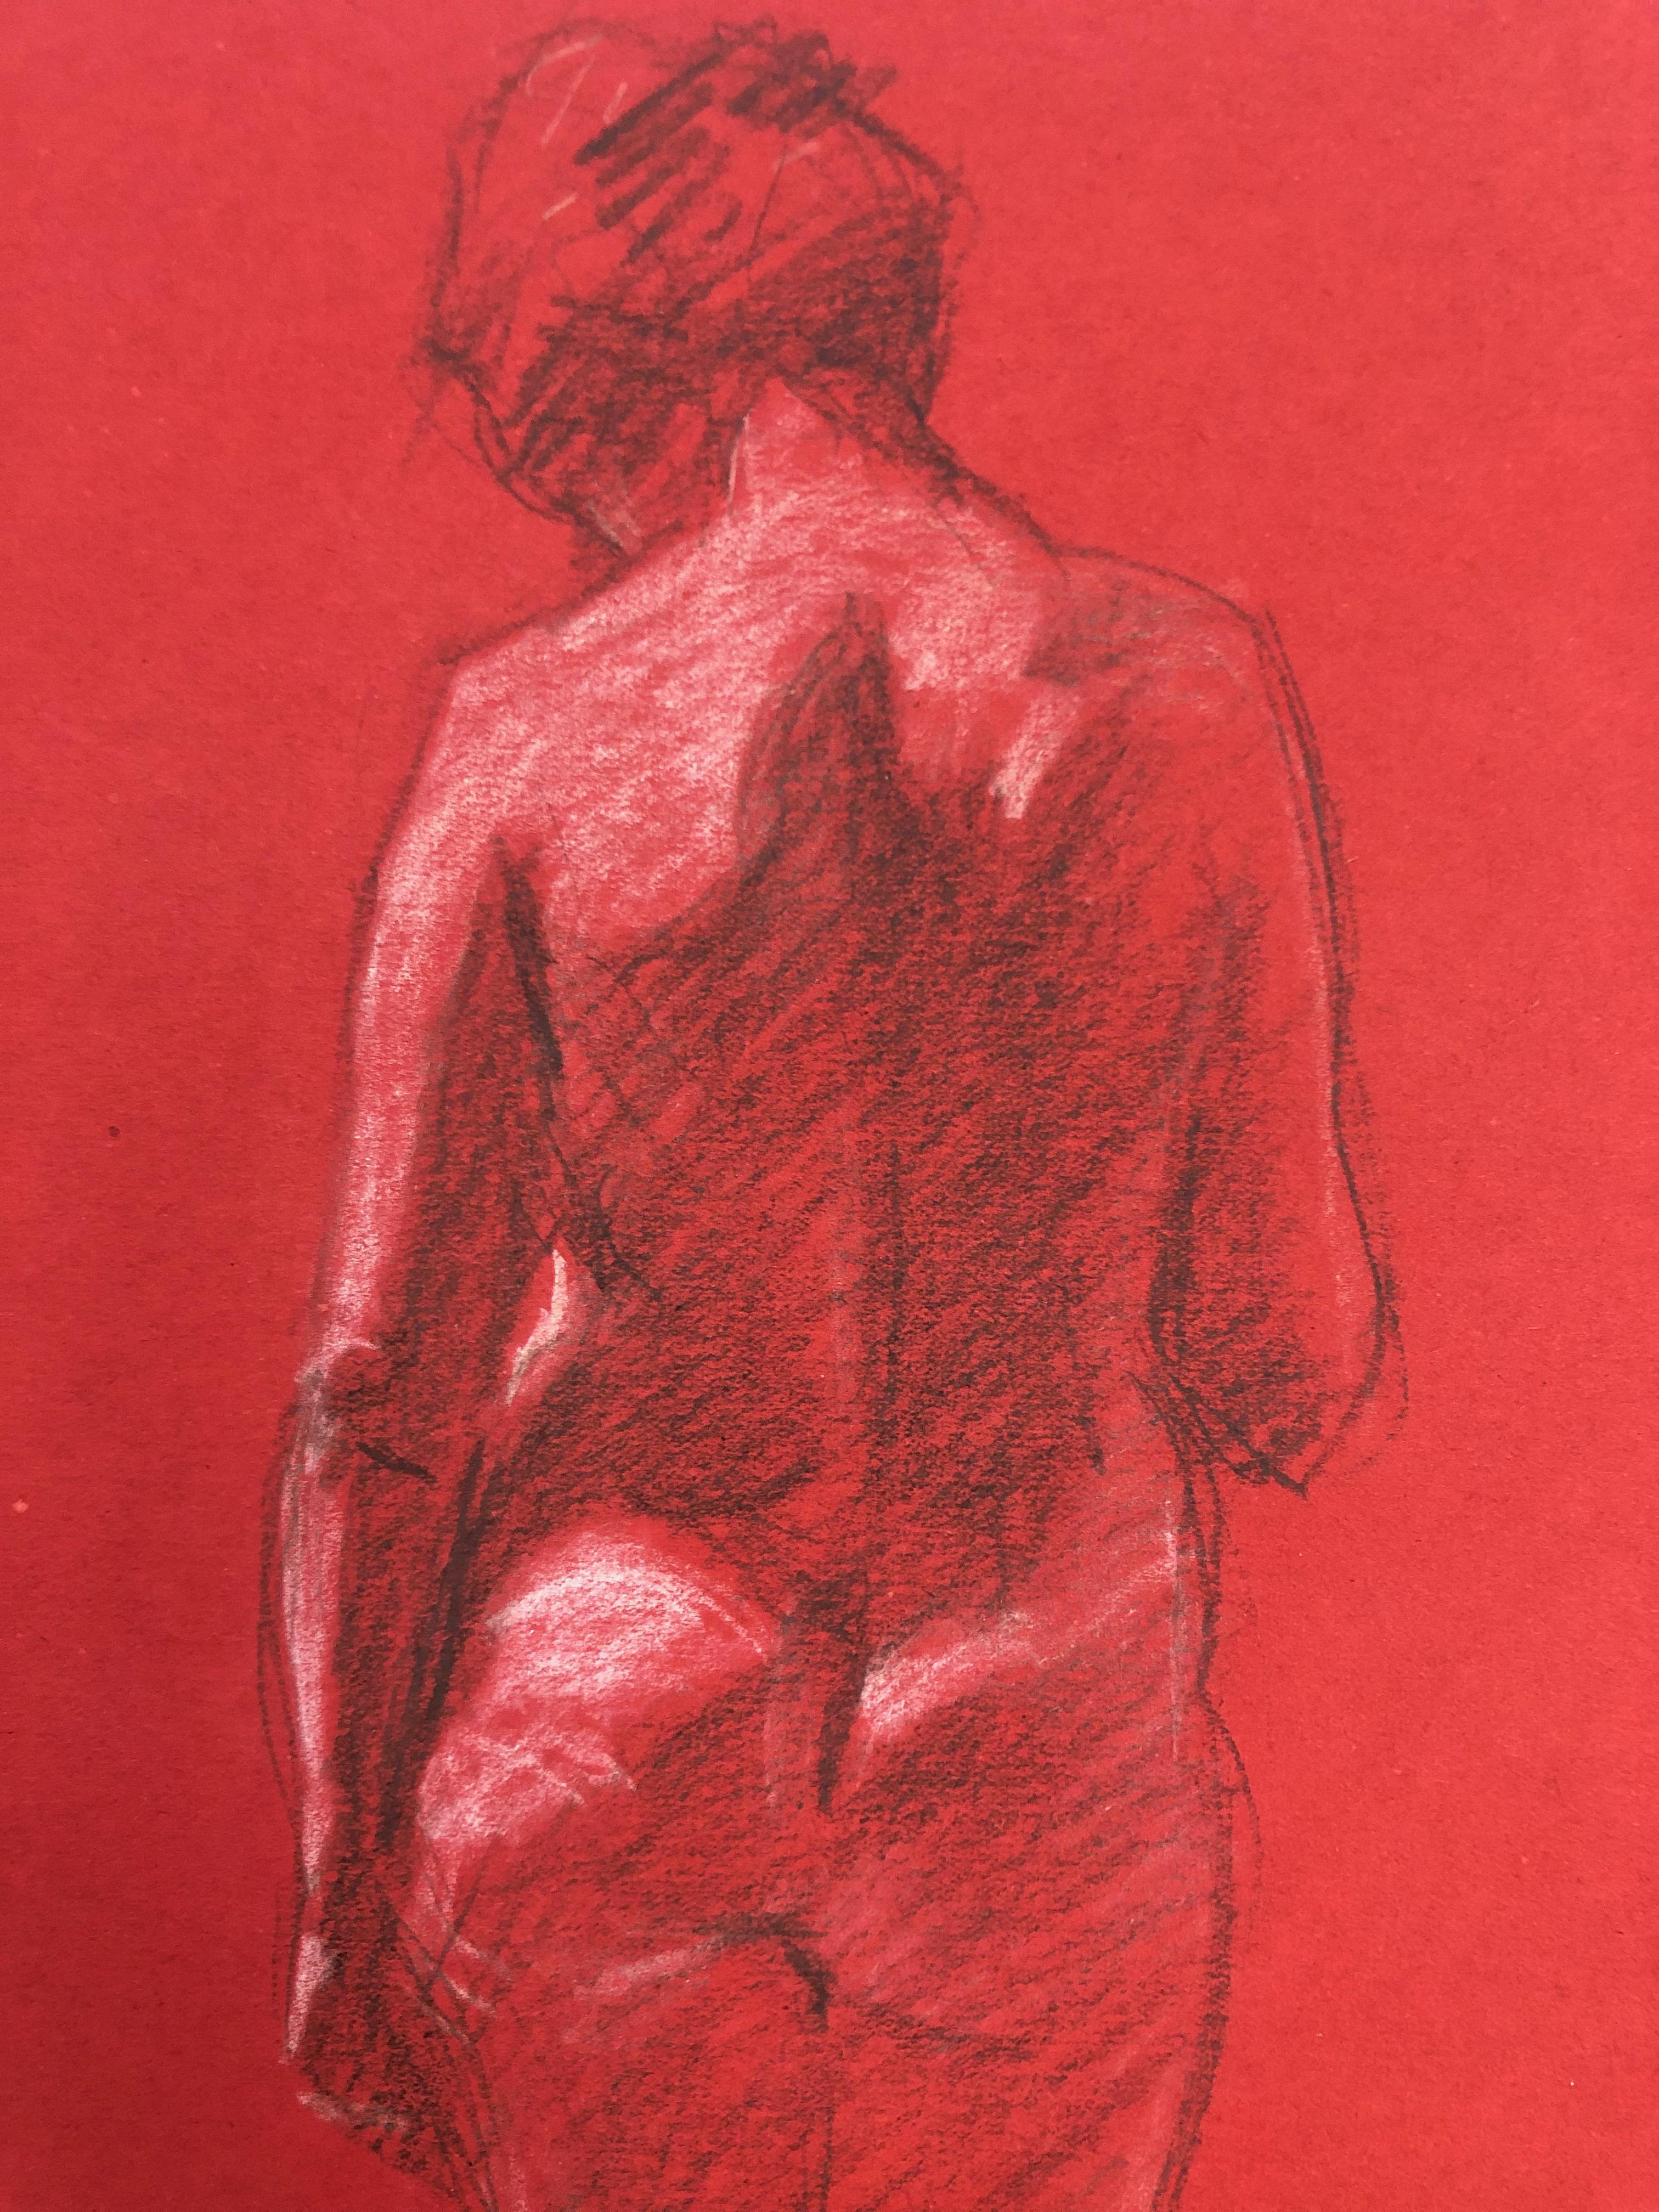  Nude Drawings On Red Paper For Sale 1